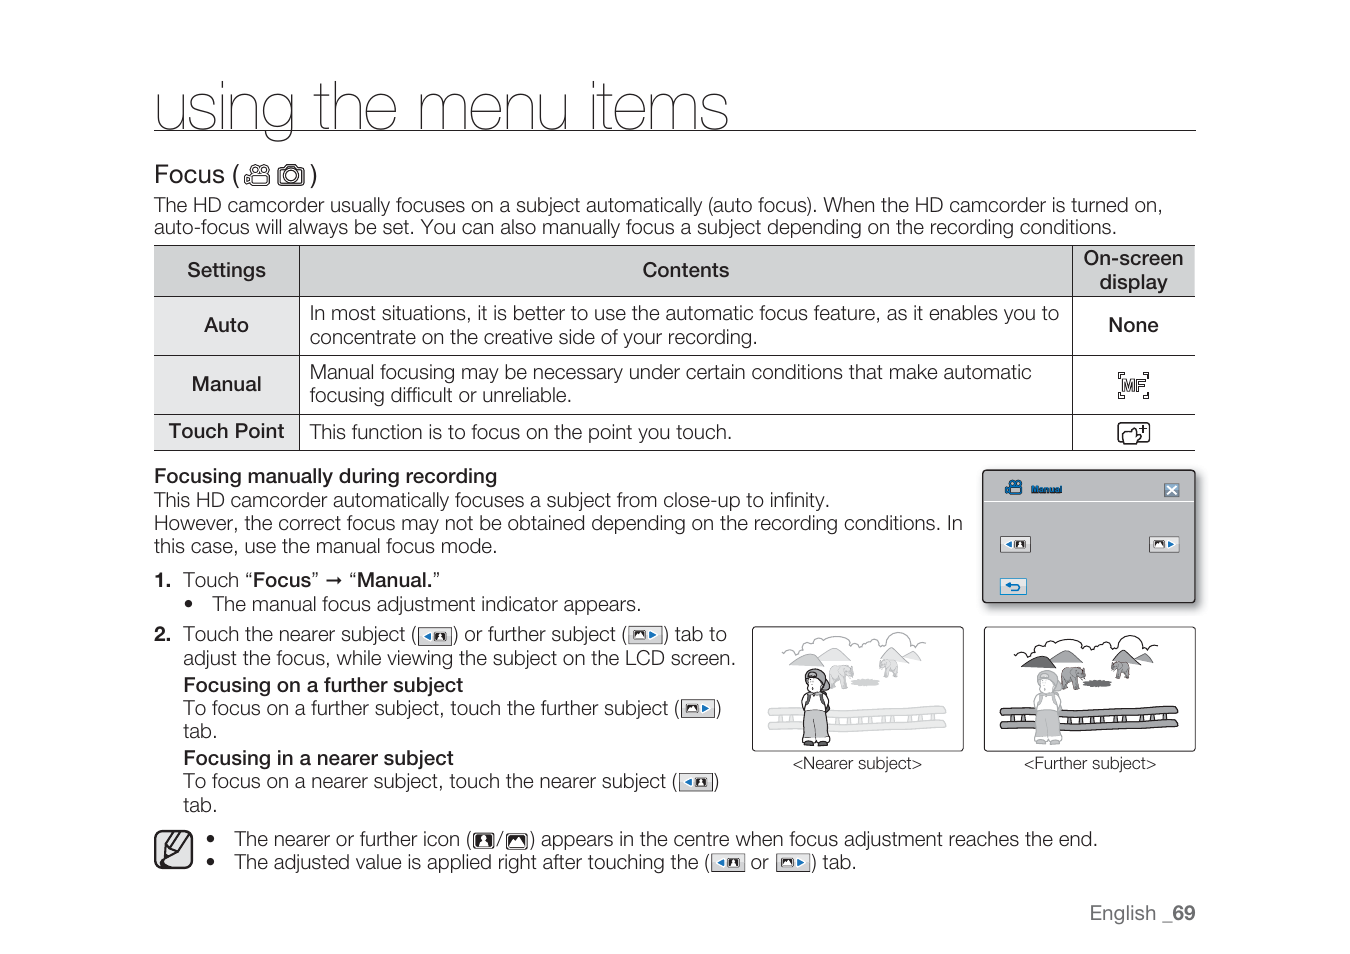 Using the menu items | Samsung HMX-H1062SP User Manual | Page 79 / 144